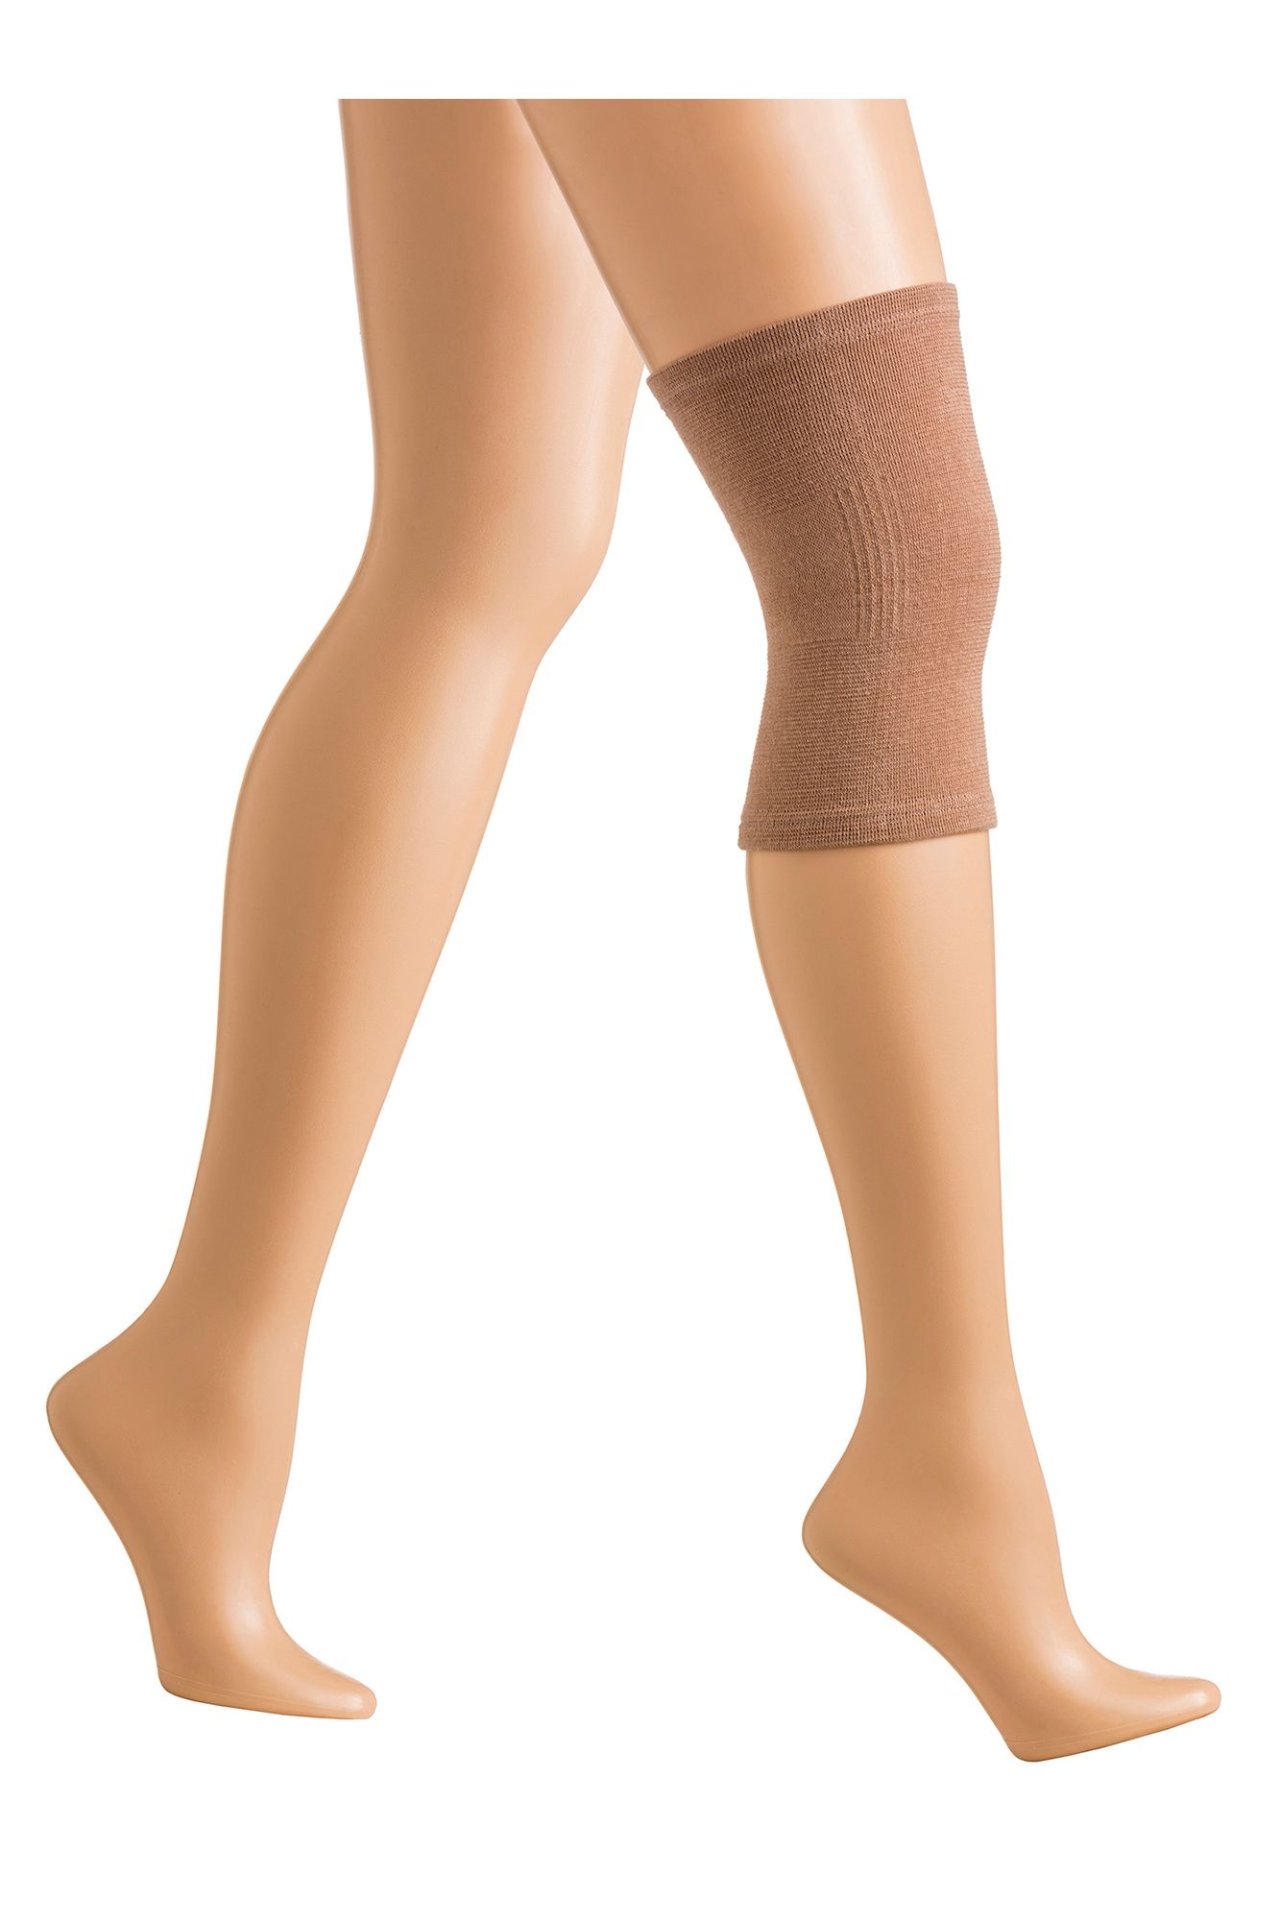 Scholl Softgrip Medium Support Class II Compression Stockings for